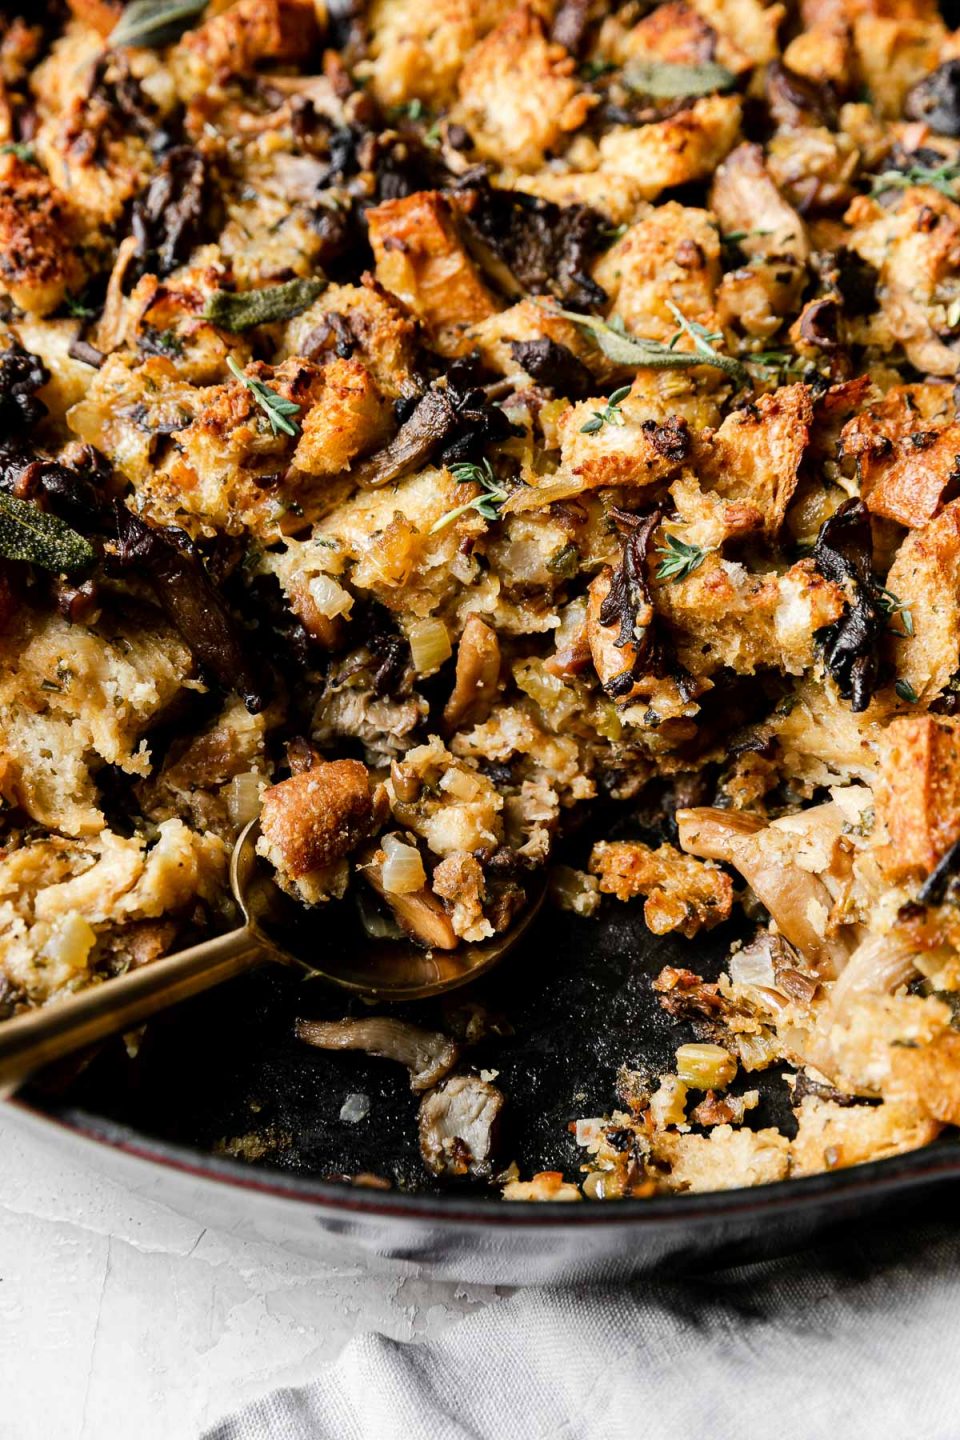 A side angle shot of Baked Crispy Wild Mushroom Stuffing with a portion scooped out fills a Grenadine colored Staub Cast Iron Skillet that sits atop a creamy white textured surface. A light gray linen napkin rests alongside the skillet and a gold serving spoon rests inside of the skillet.